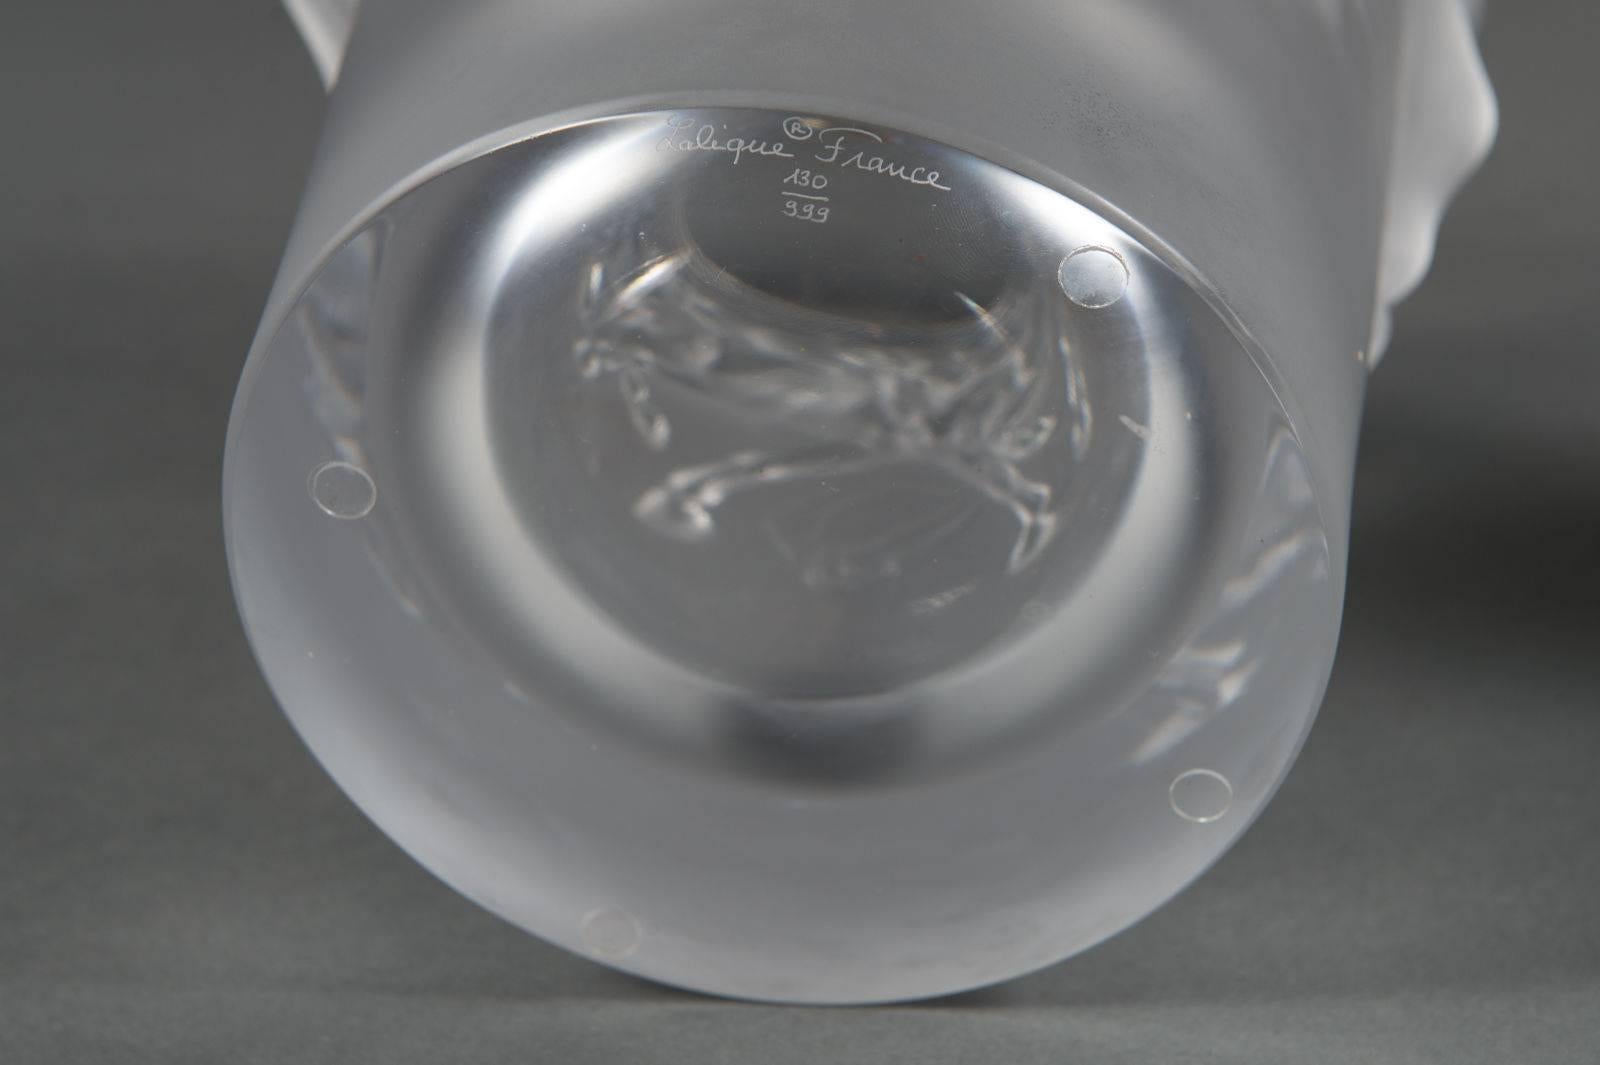 Enveloped by a herd of wild horses, the Equus vase pays homage to the most beautiful conquest ever made by Man, the ultimate symbol of strength and speed. The ground trembles and dances under their crystal hooves, while the movement of their manes